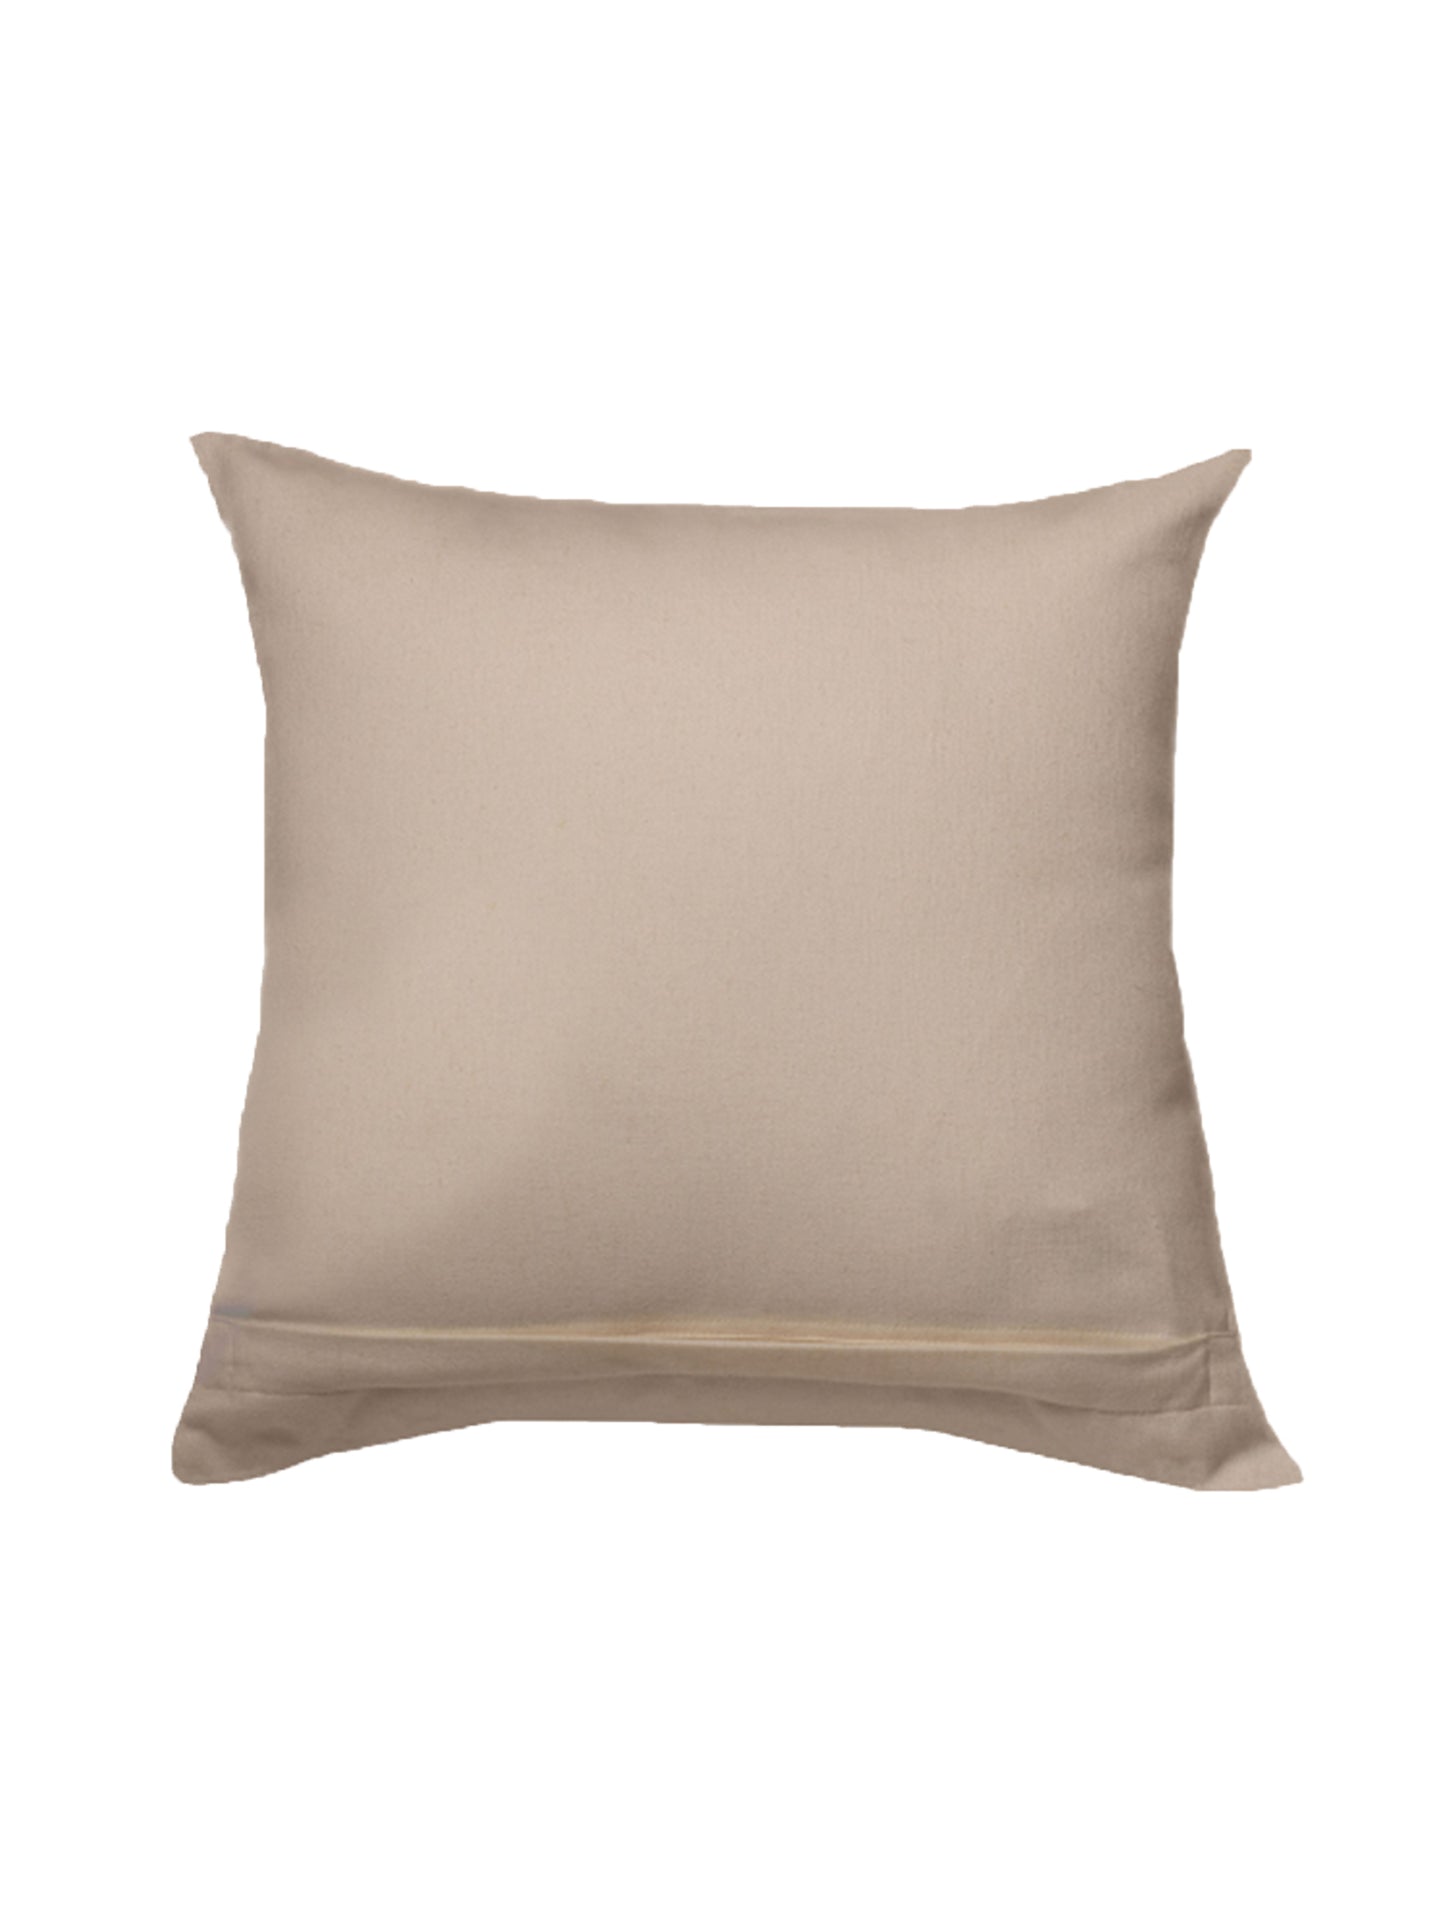 Cushion Cover Set of 3 100% Polyester One-Side Pleated And Printed Multi - 16" x 16"